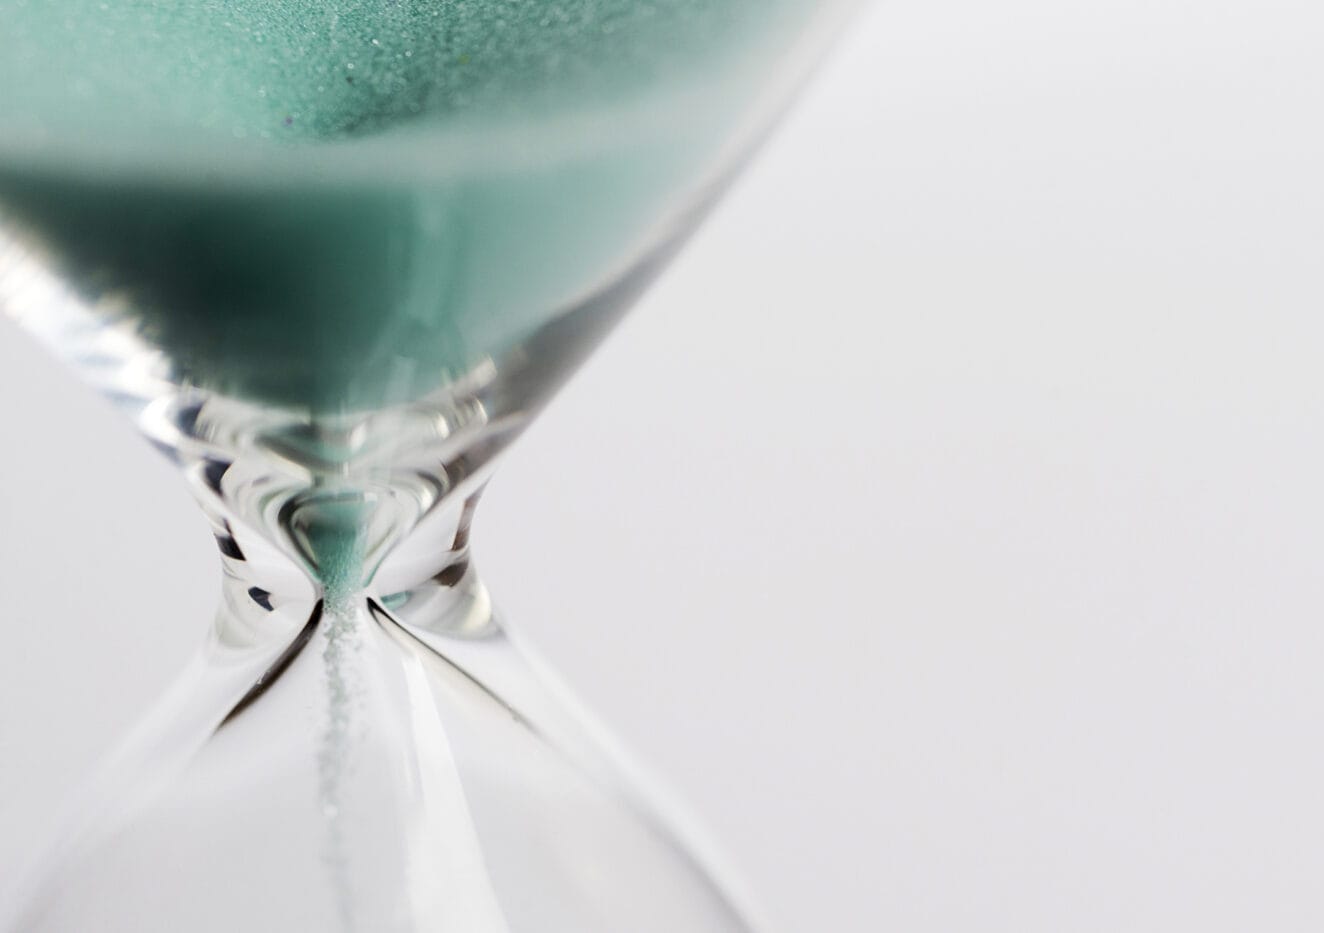 Hourglass close-up on a white background, place under the text.